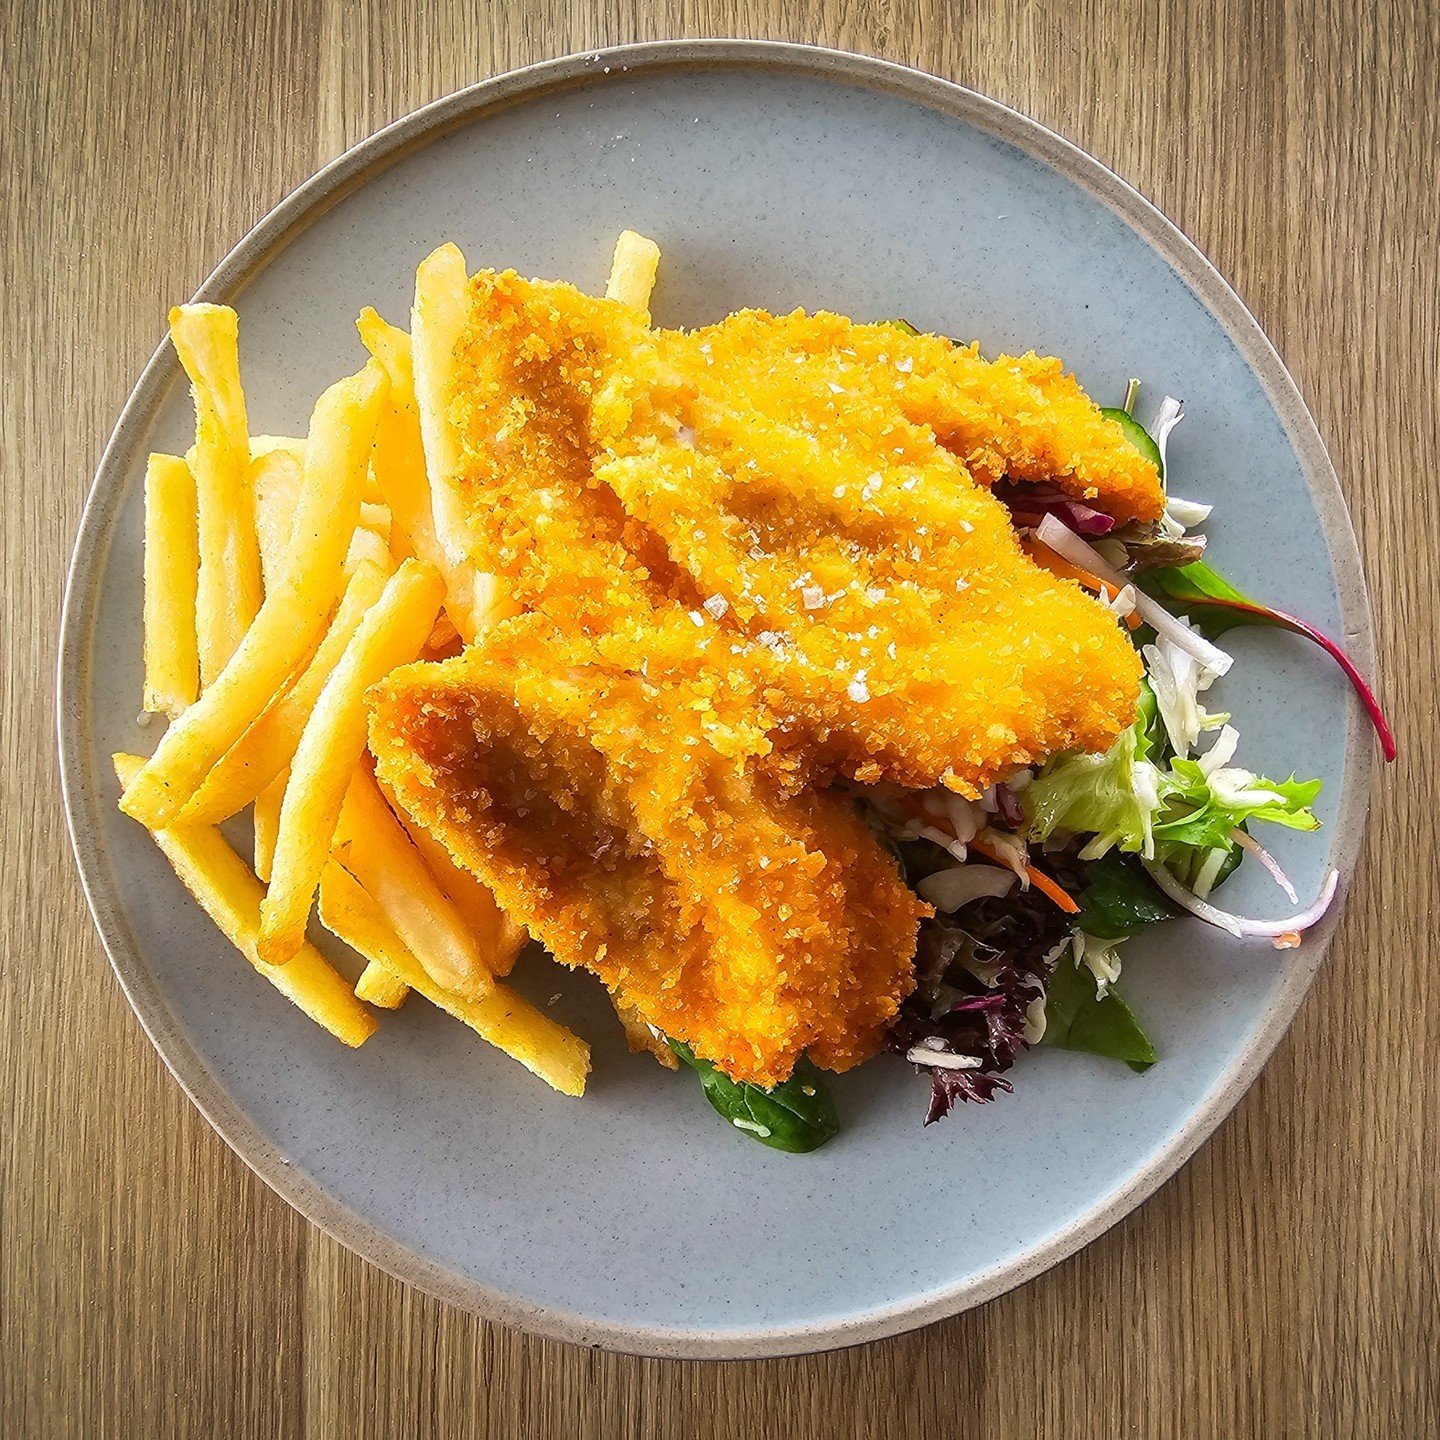 🥳 Get ready for Wednesdays at Huntlee Tavern! Dive into our $18 Schnitzel Night and add $5 toppers for extra flavor. See you there! 🍻🍴

#HuntleeTavern #SchnitzelNight #Foodie #LocalEats #DinnerSpecials #MidweekTreat #FamilyDining #FoodLovers #Yum 